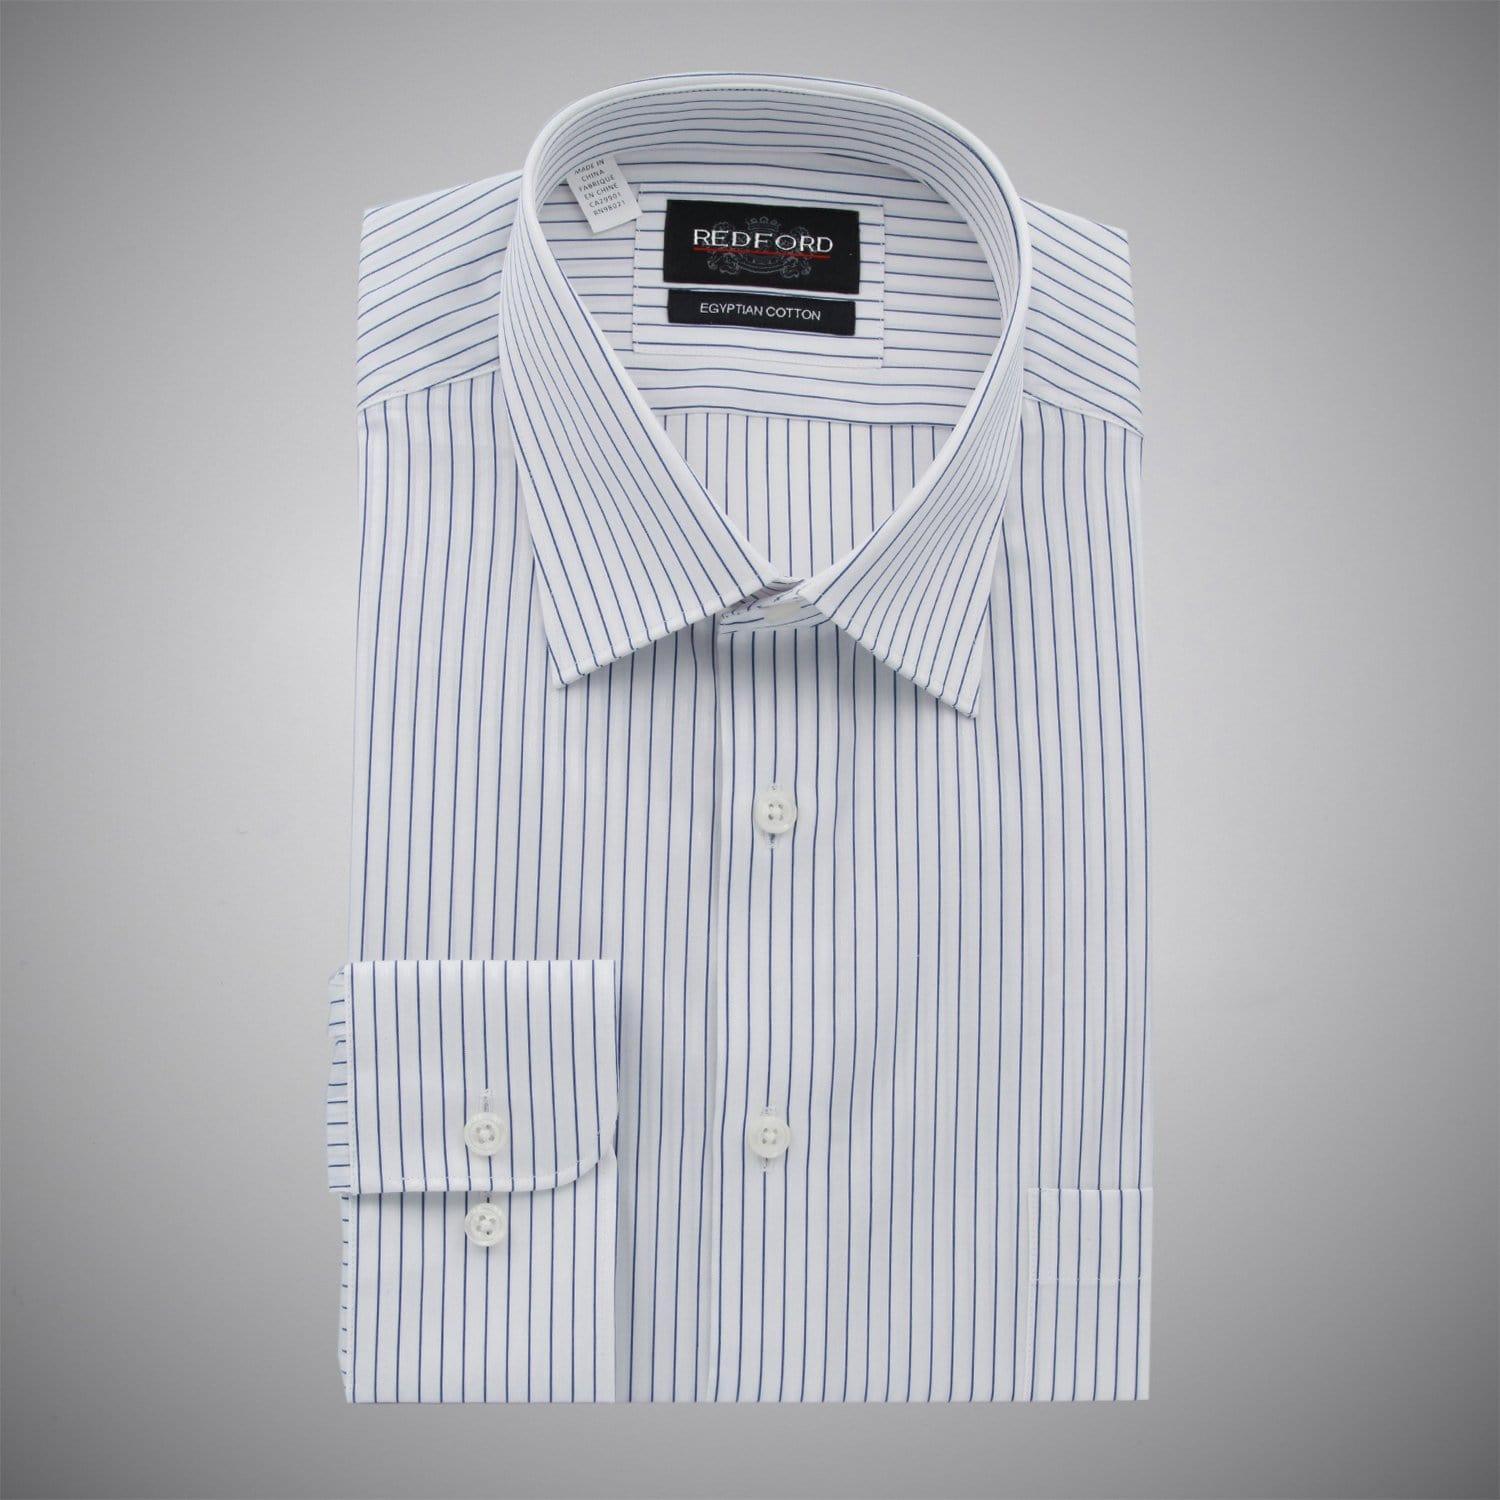 White with Blue Stripe Shirt - Just White Shirts